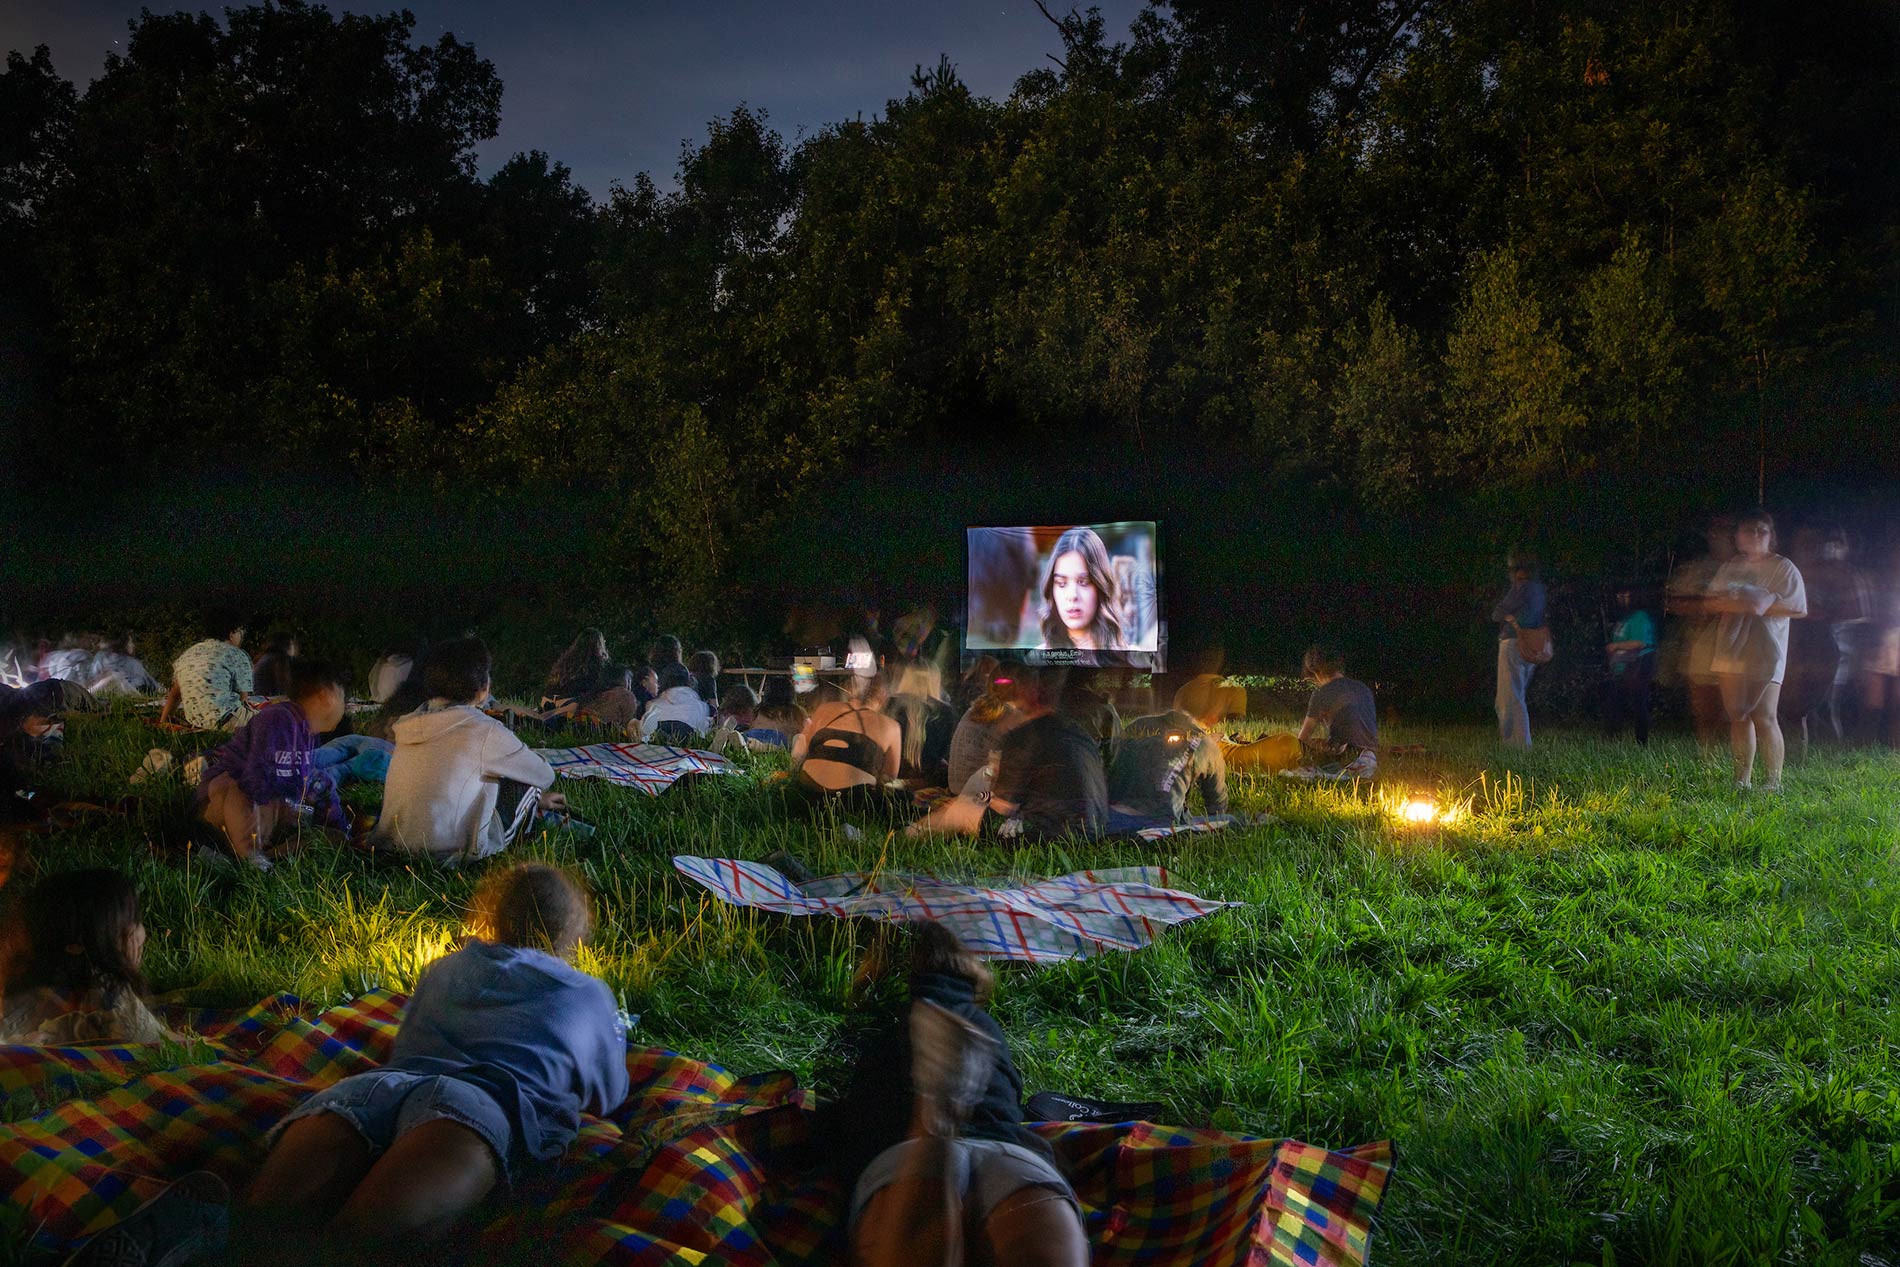 An outdoor screening of the tv series based on the life of Emily Dickinson.